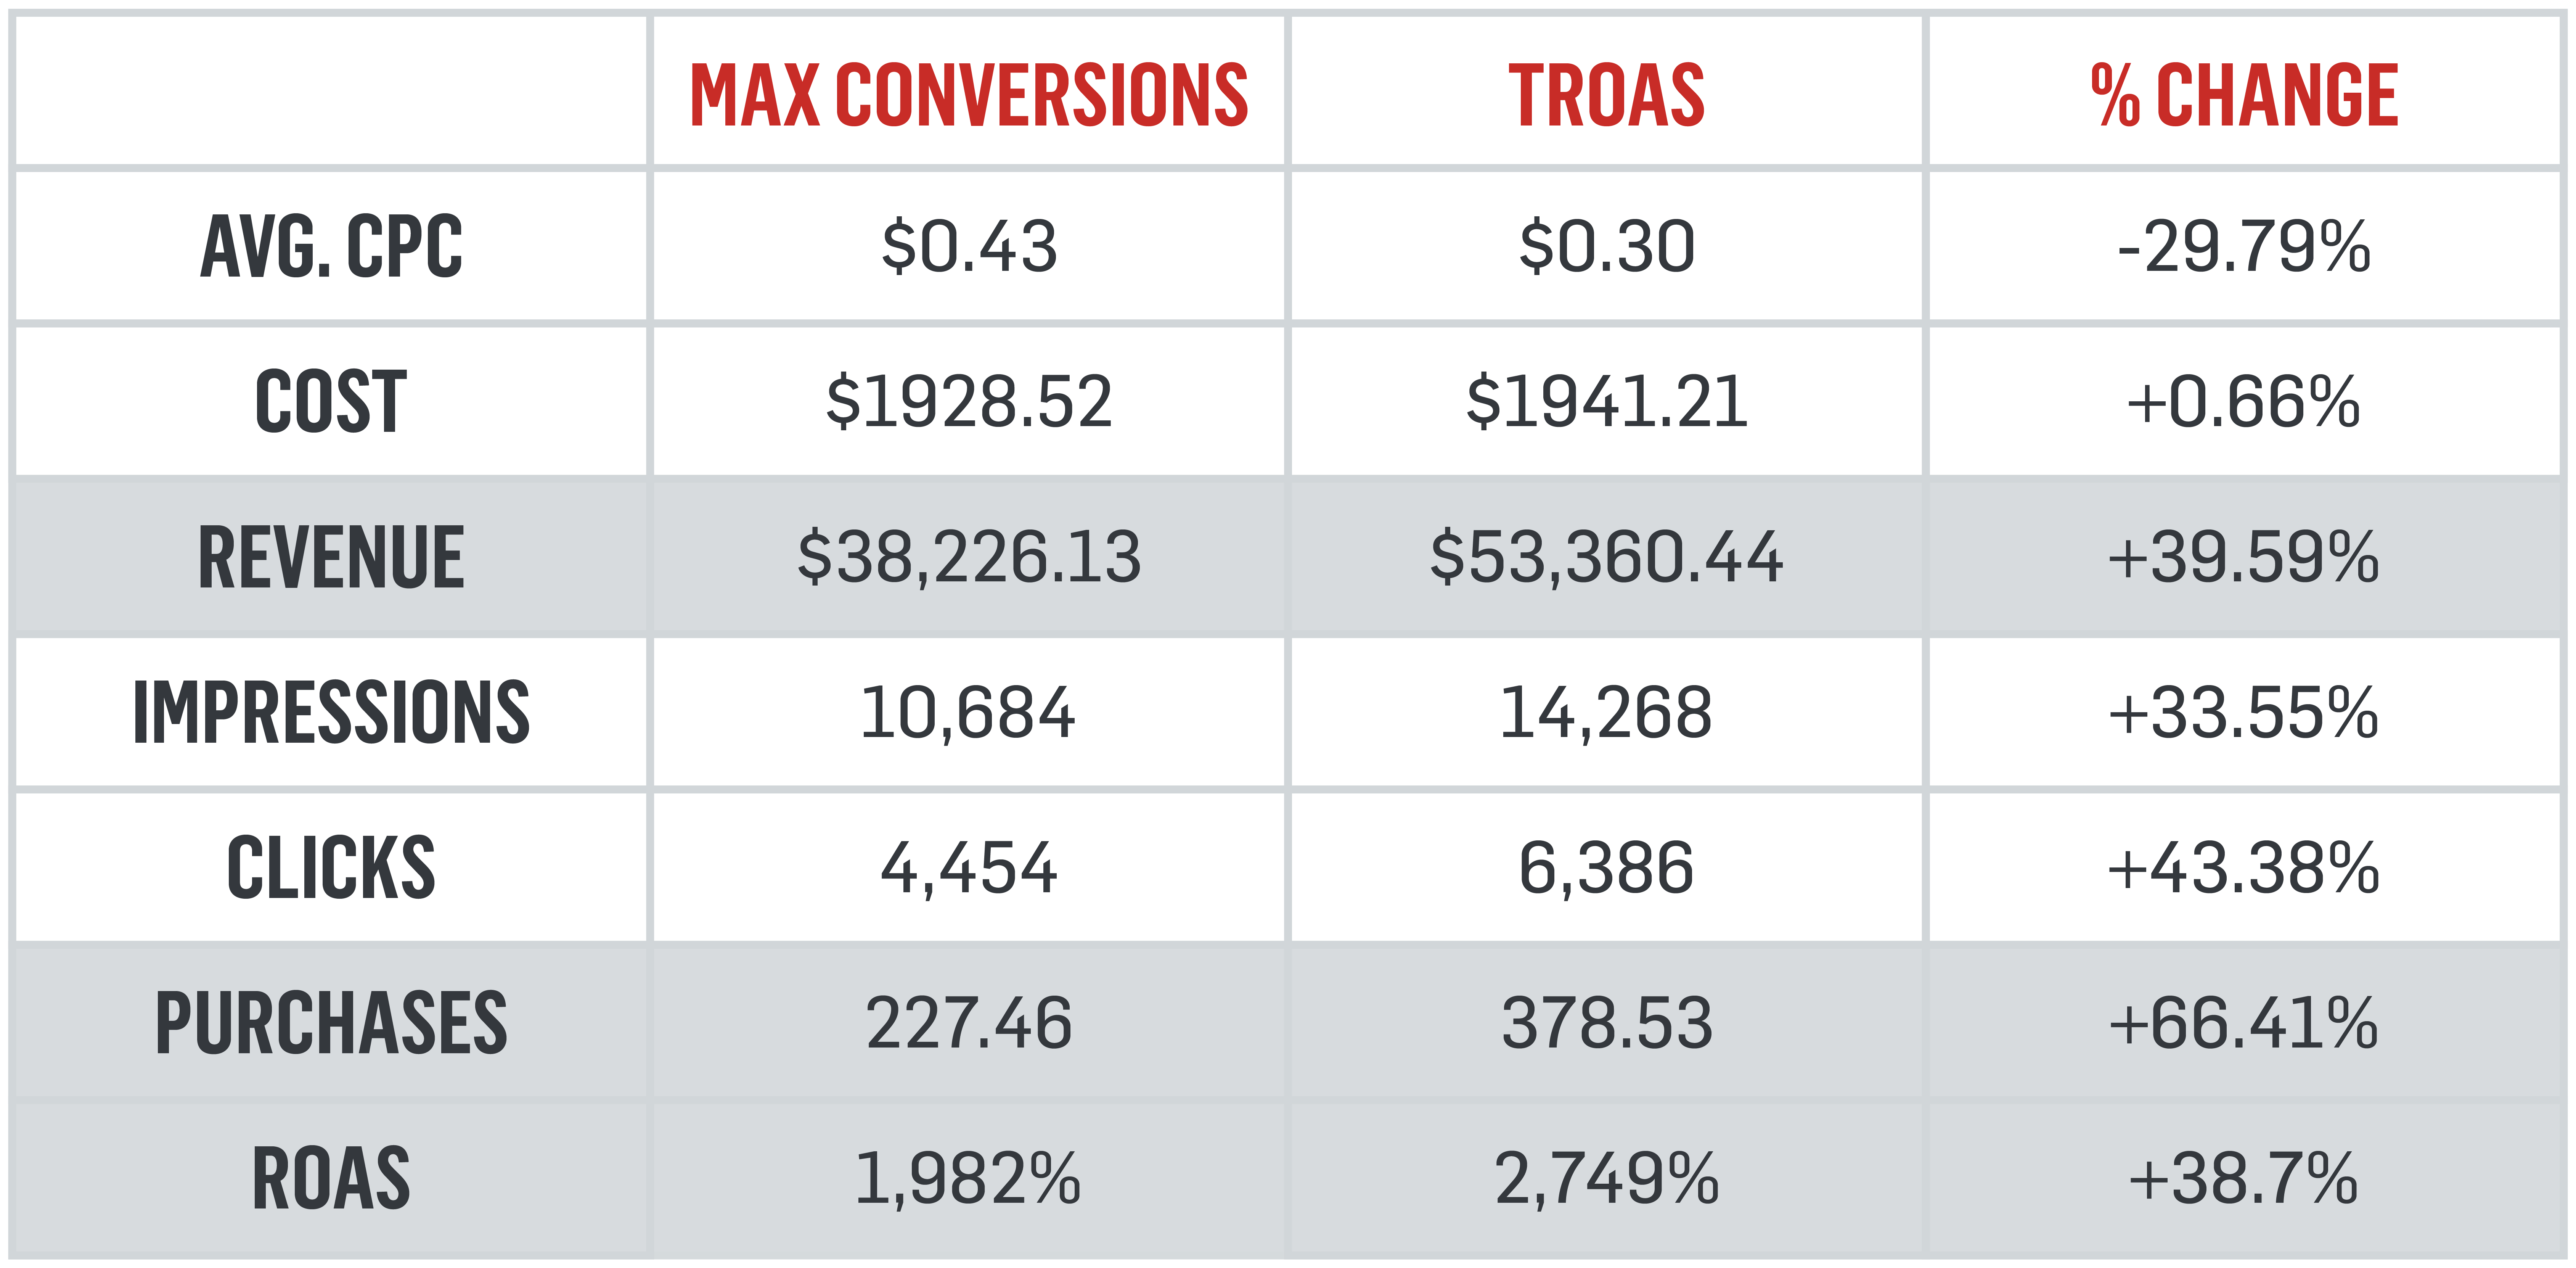 Chart overviewing max conversions, tROAS, and percent change for average CPC, cost, revenue, impressions, clicks, purchases and ROAs.